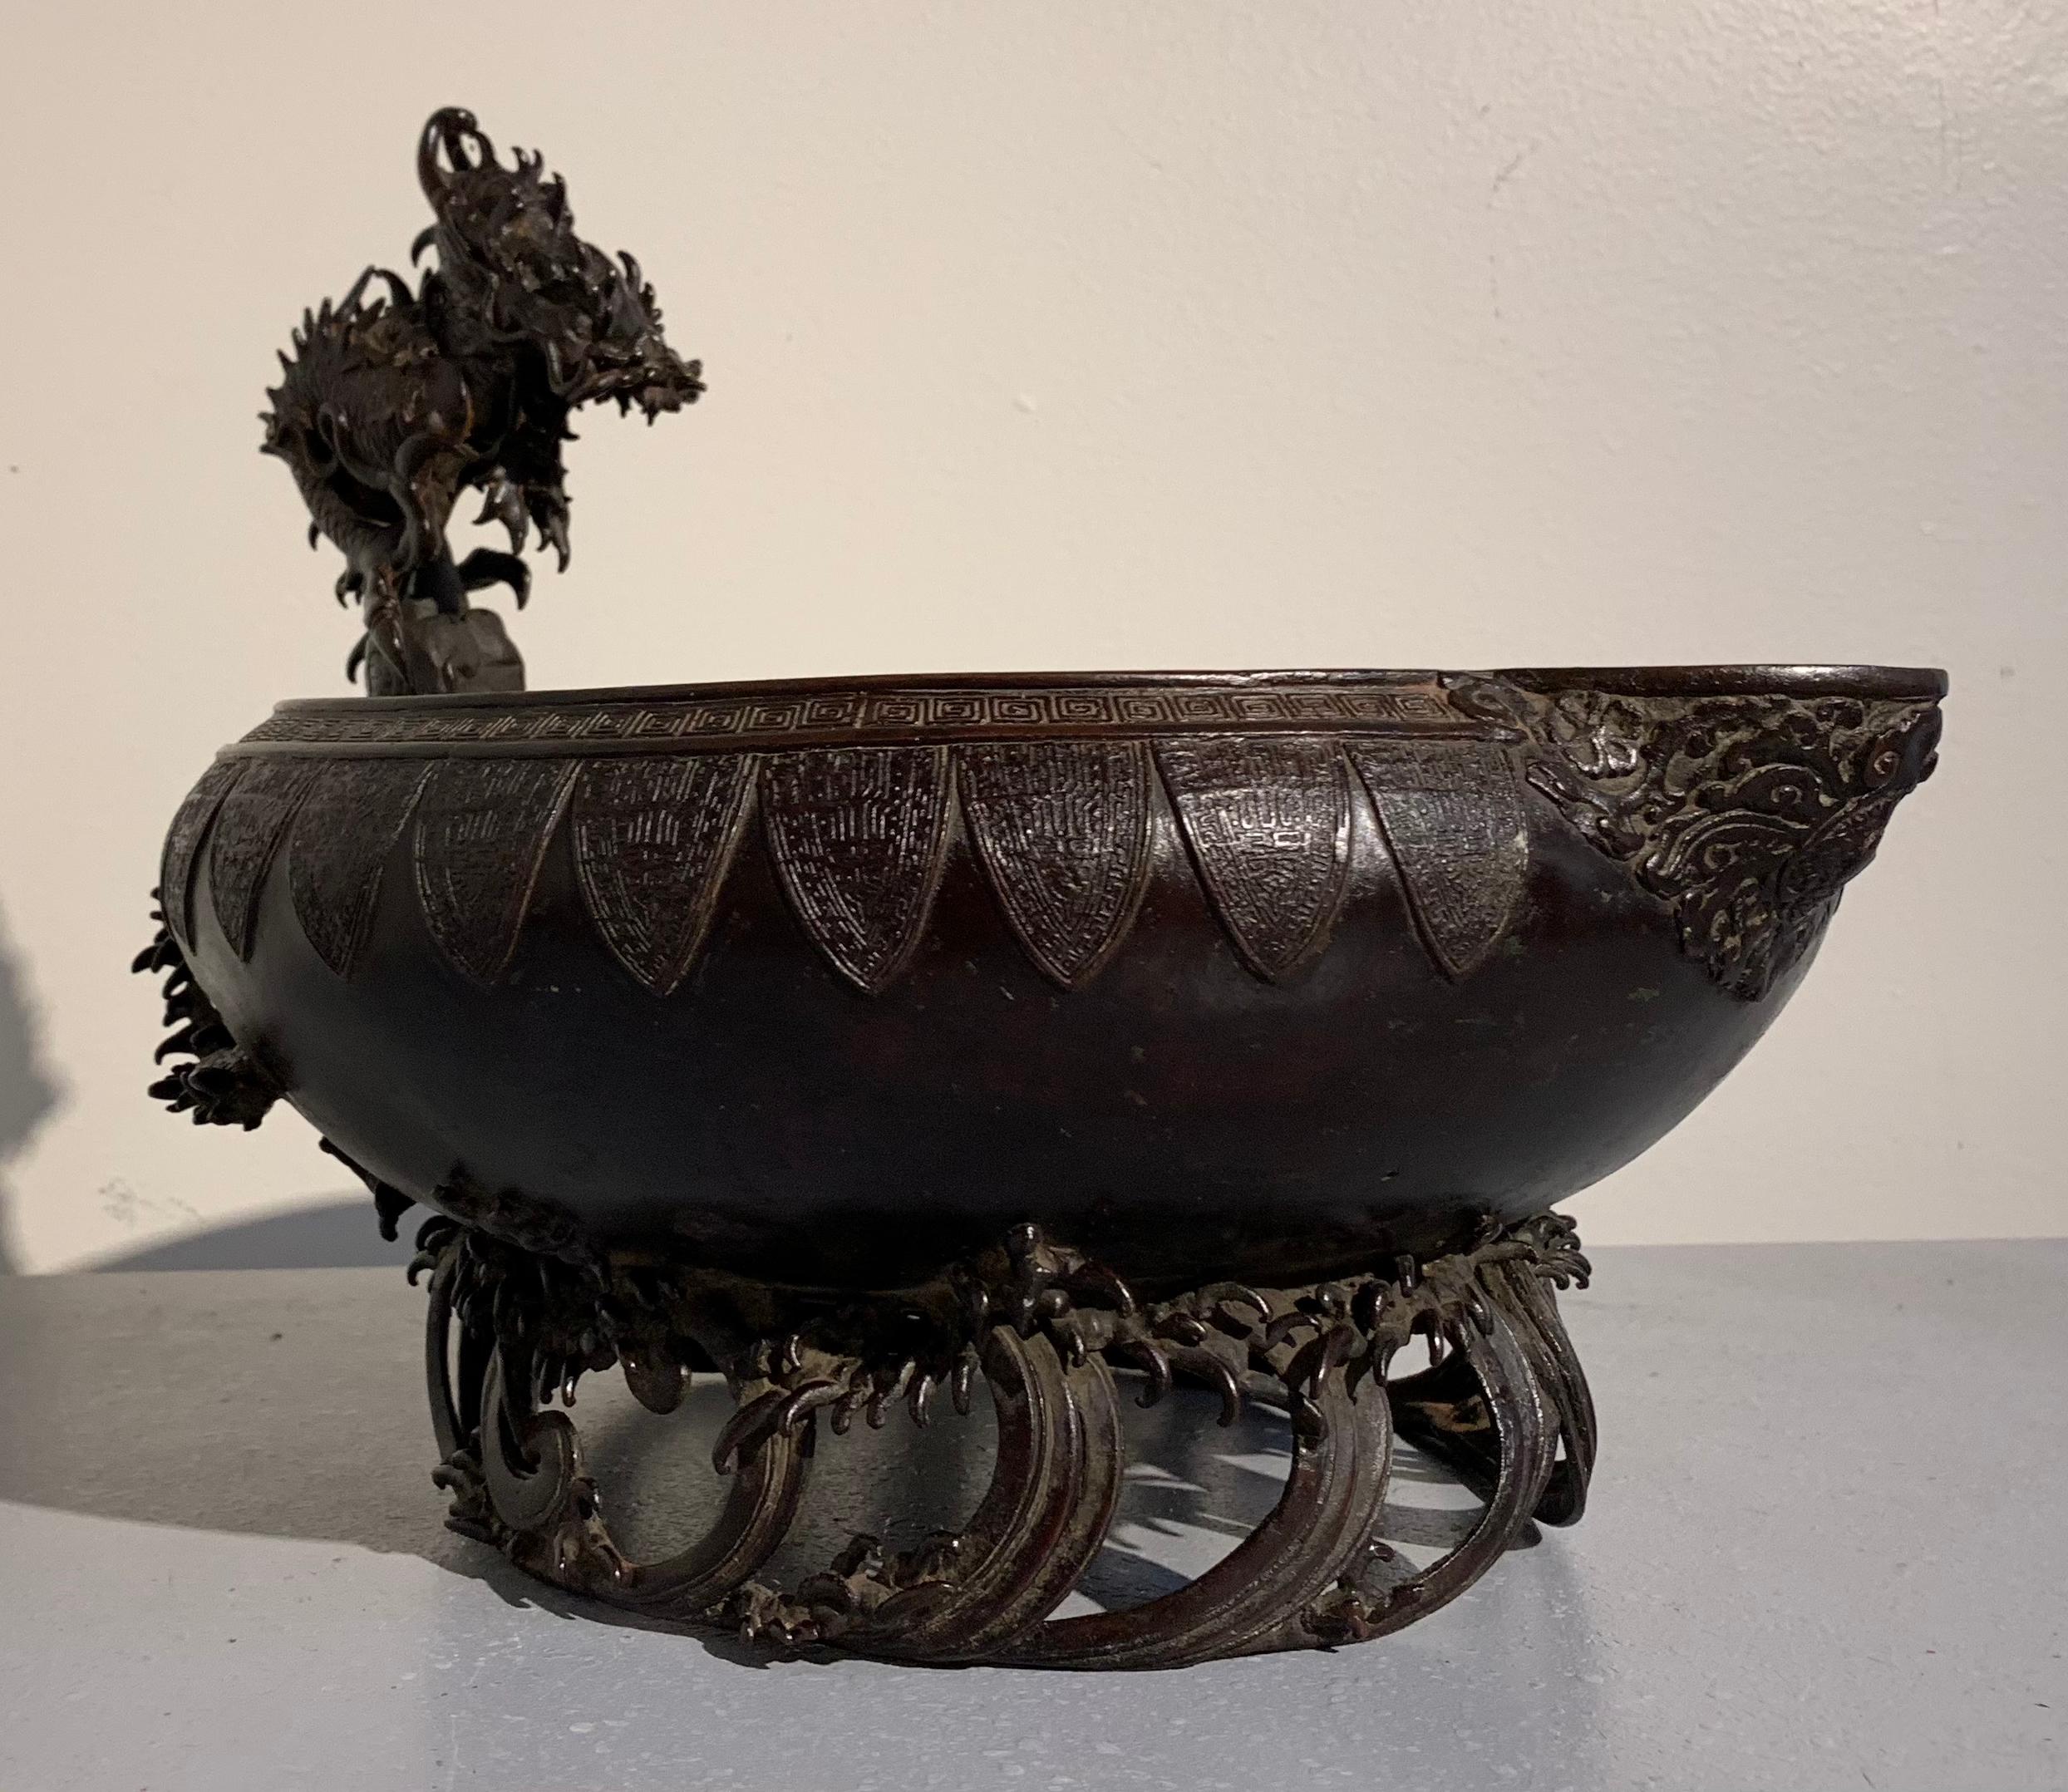 A 19th century Japanese Meiji Period bronze water basin, called a mizubachi, with archaistic designs and a powerfully cast dragon handle, all supported on a high base designed as crashing waves. 

The basin is cast with an archaistic Chinese